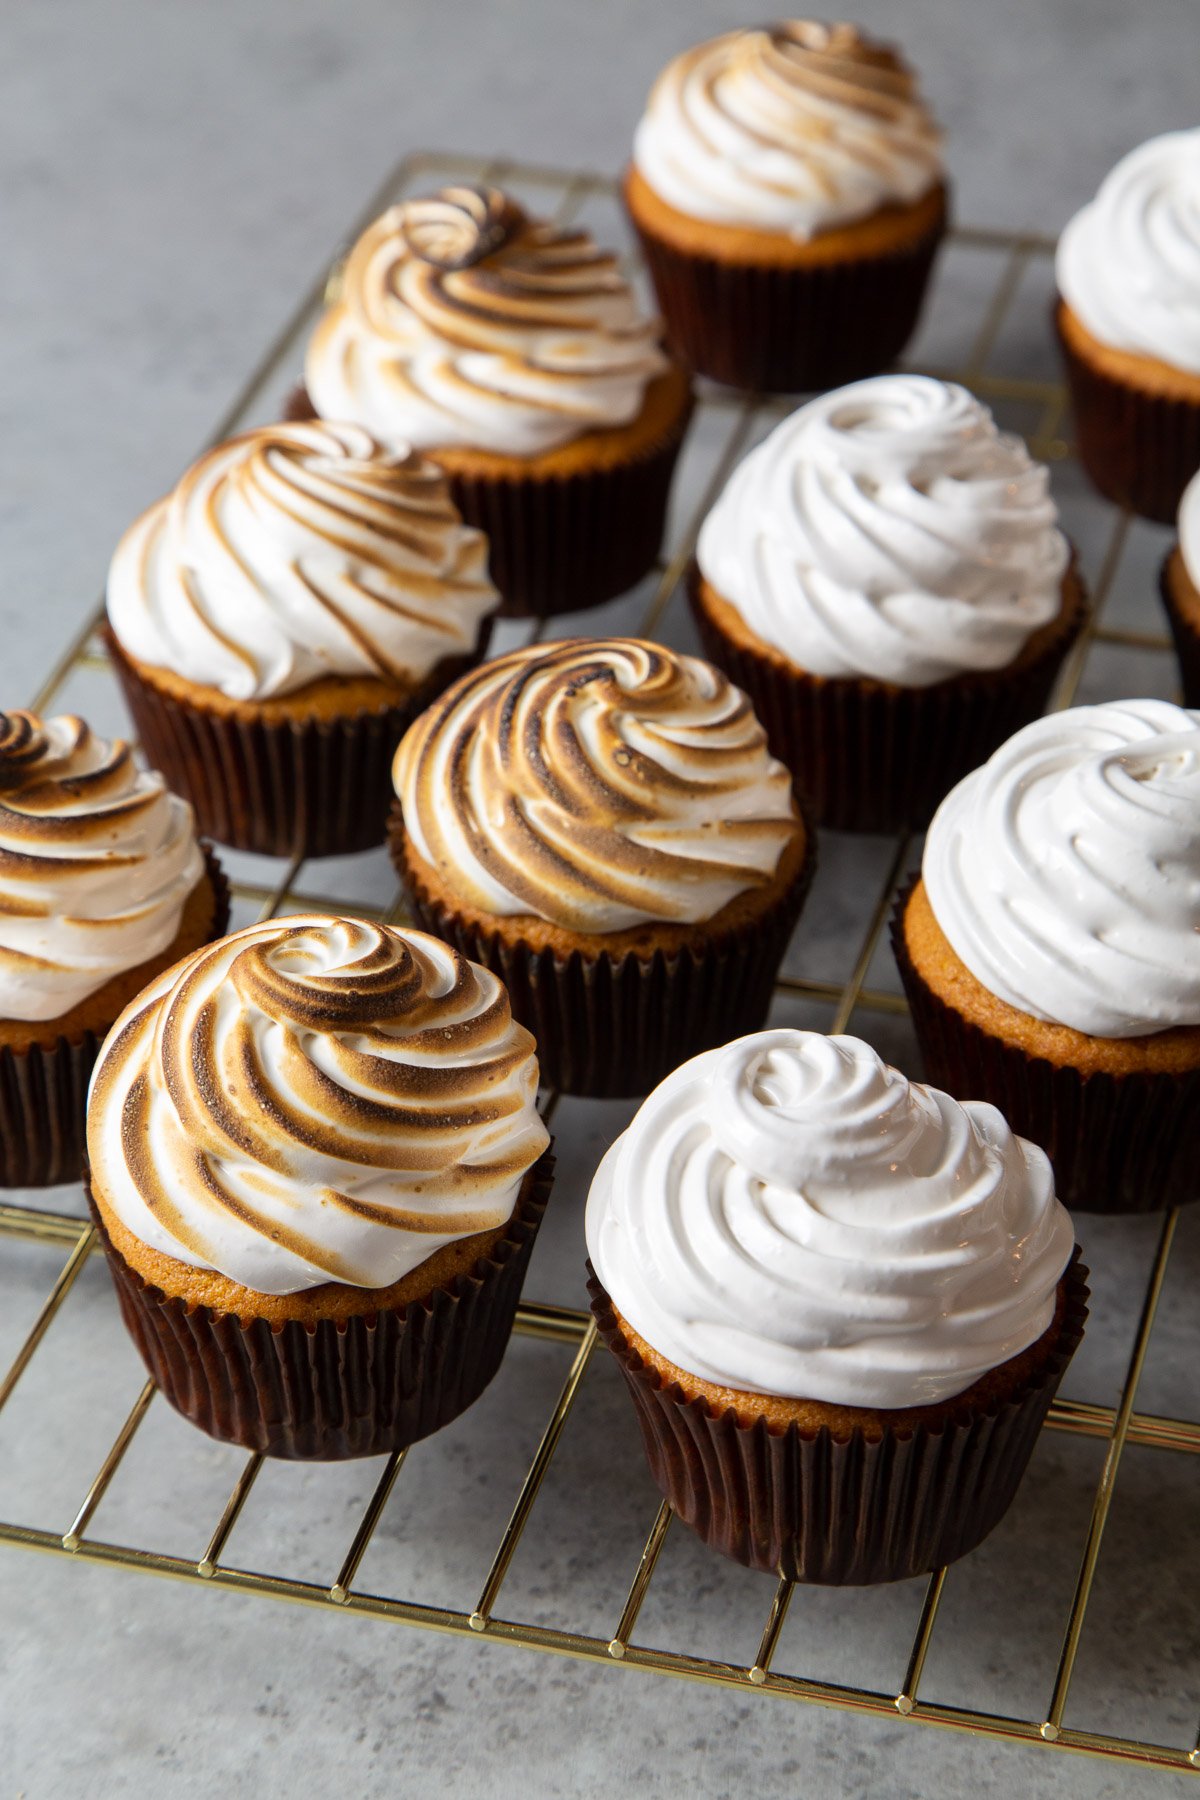 sweet potato cupcakes on gold wire cooling rack, some cupcakes have toasted meringue topping.